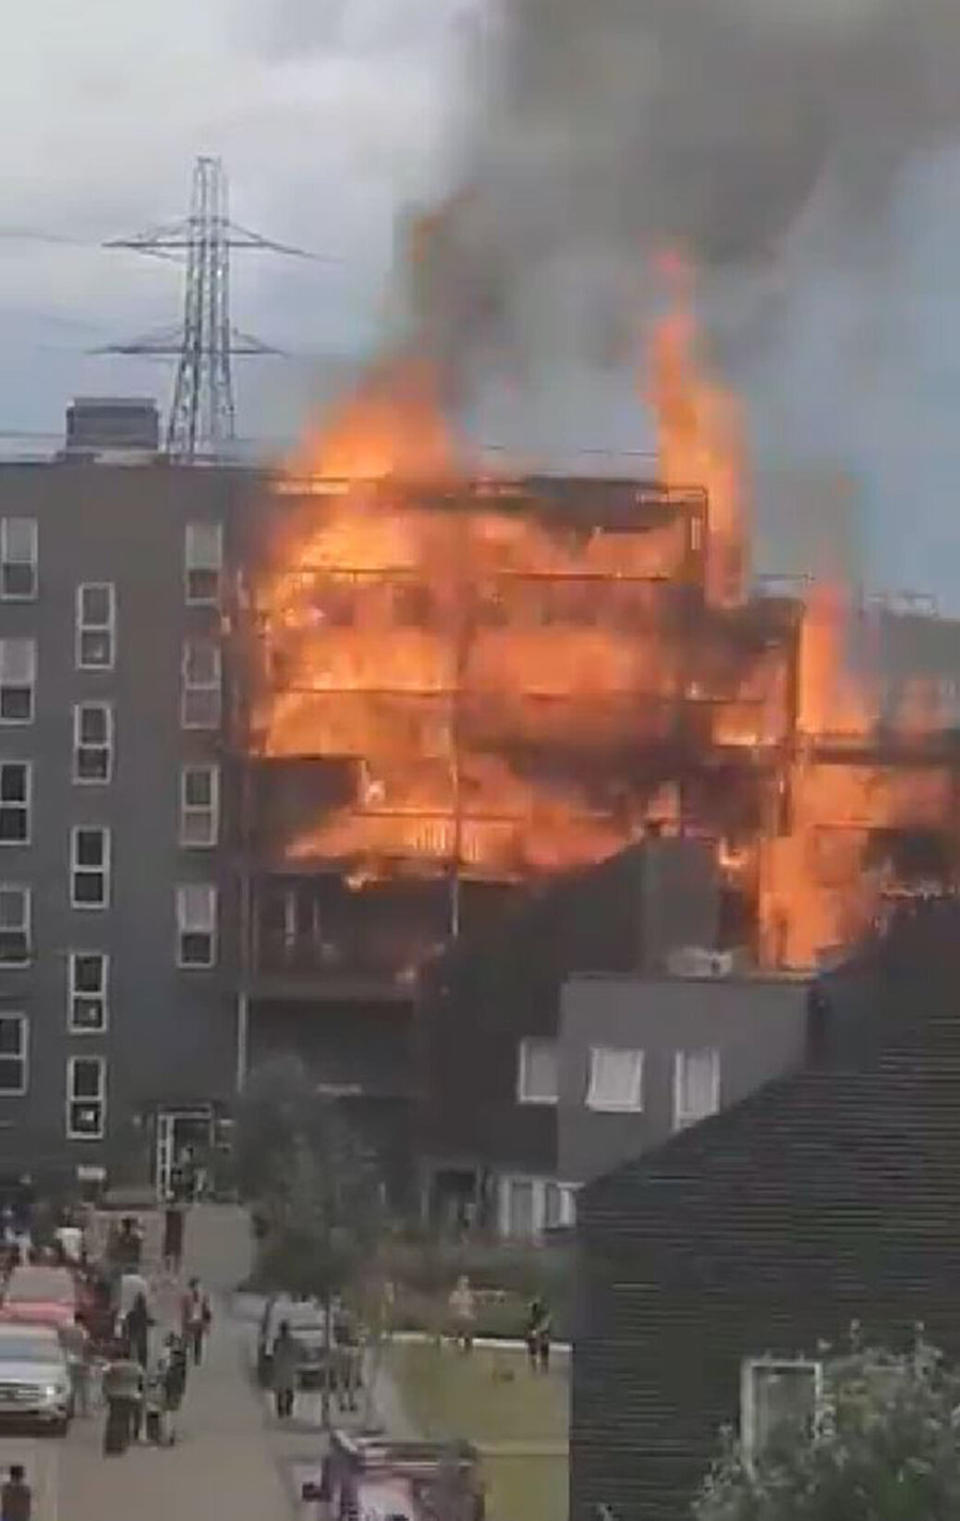 Screengrab taken with permission from a video posted by @SyeddIslam of the fire at a block of flats in Barking, east London.